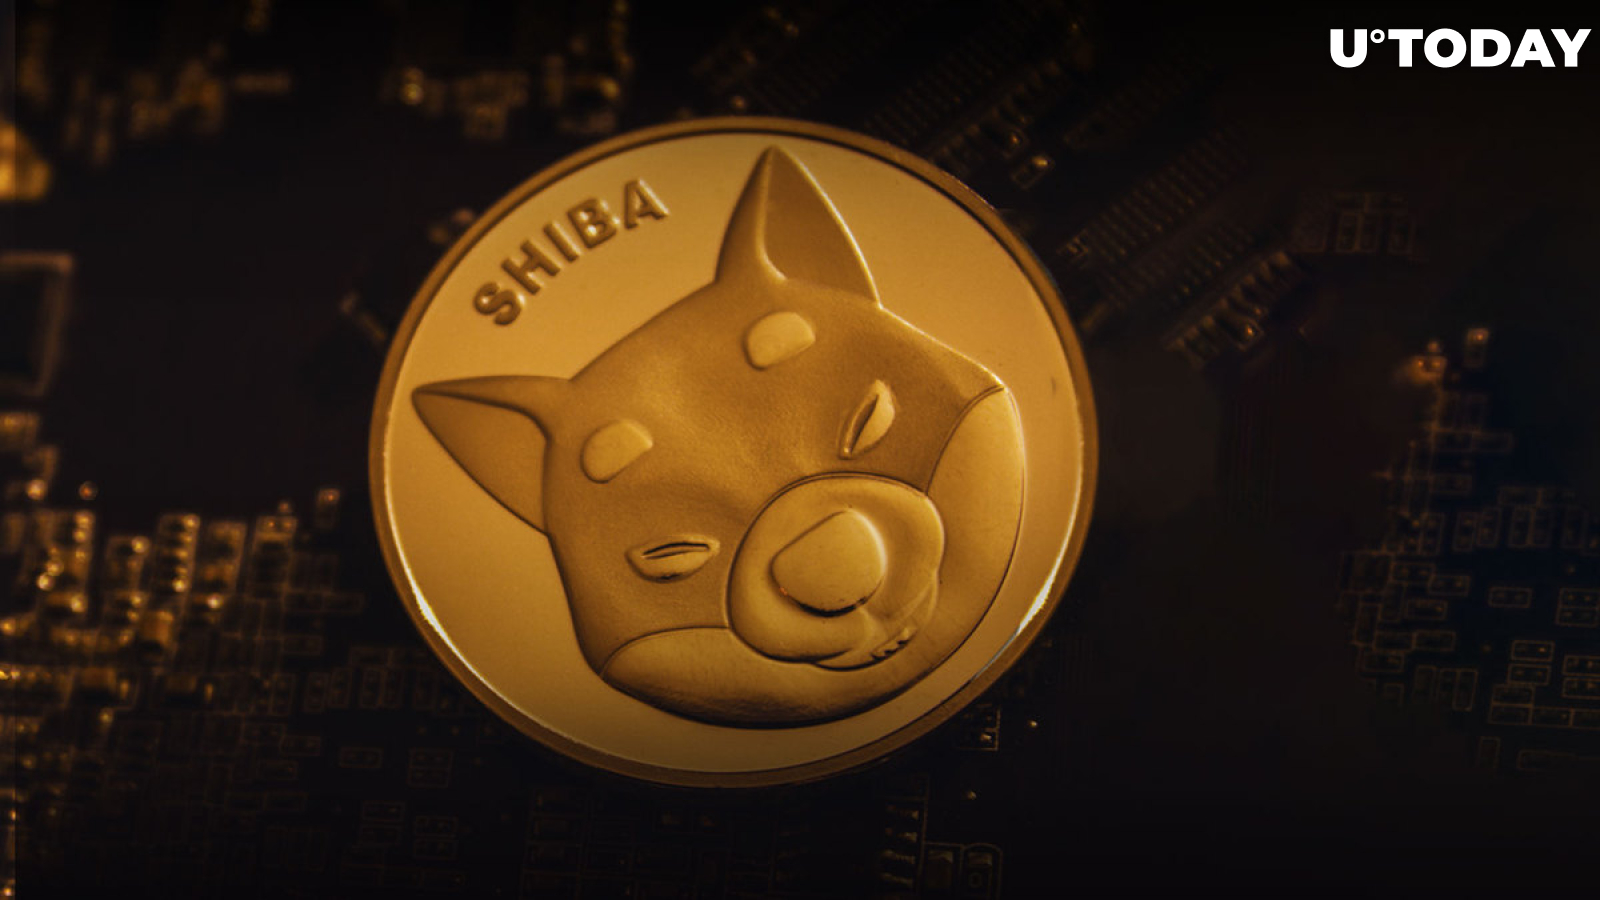 SHIB Gains 1,000+ New Holders Within One Day, Reaching New ATH: Details